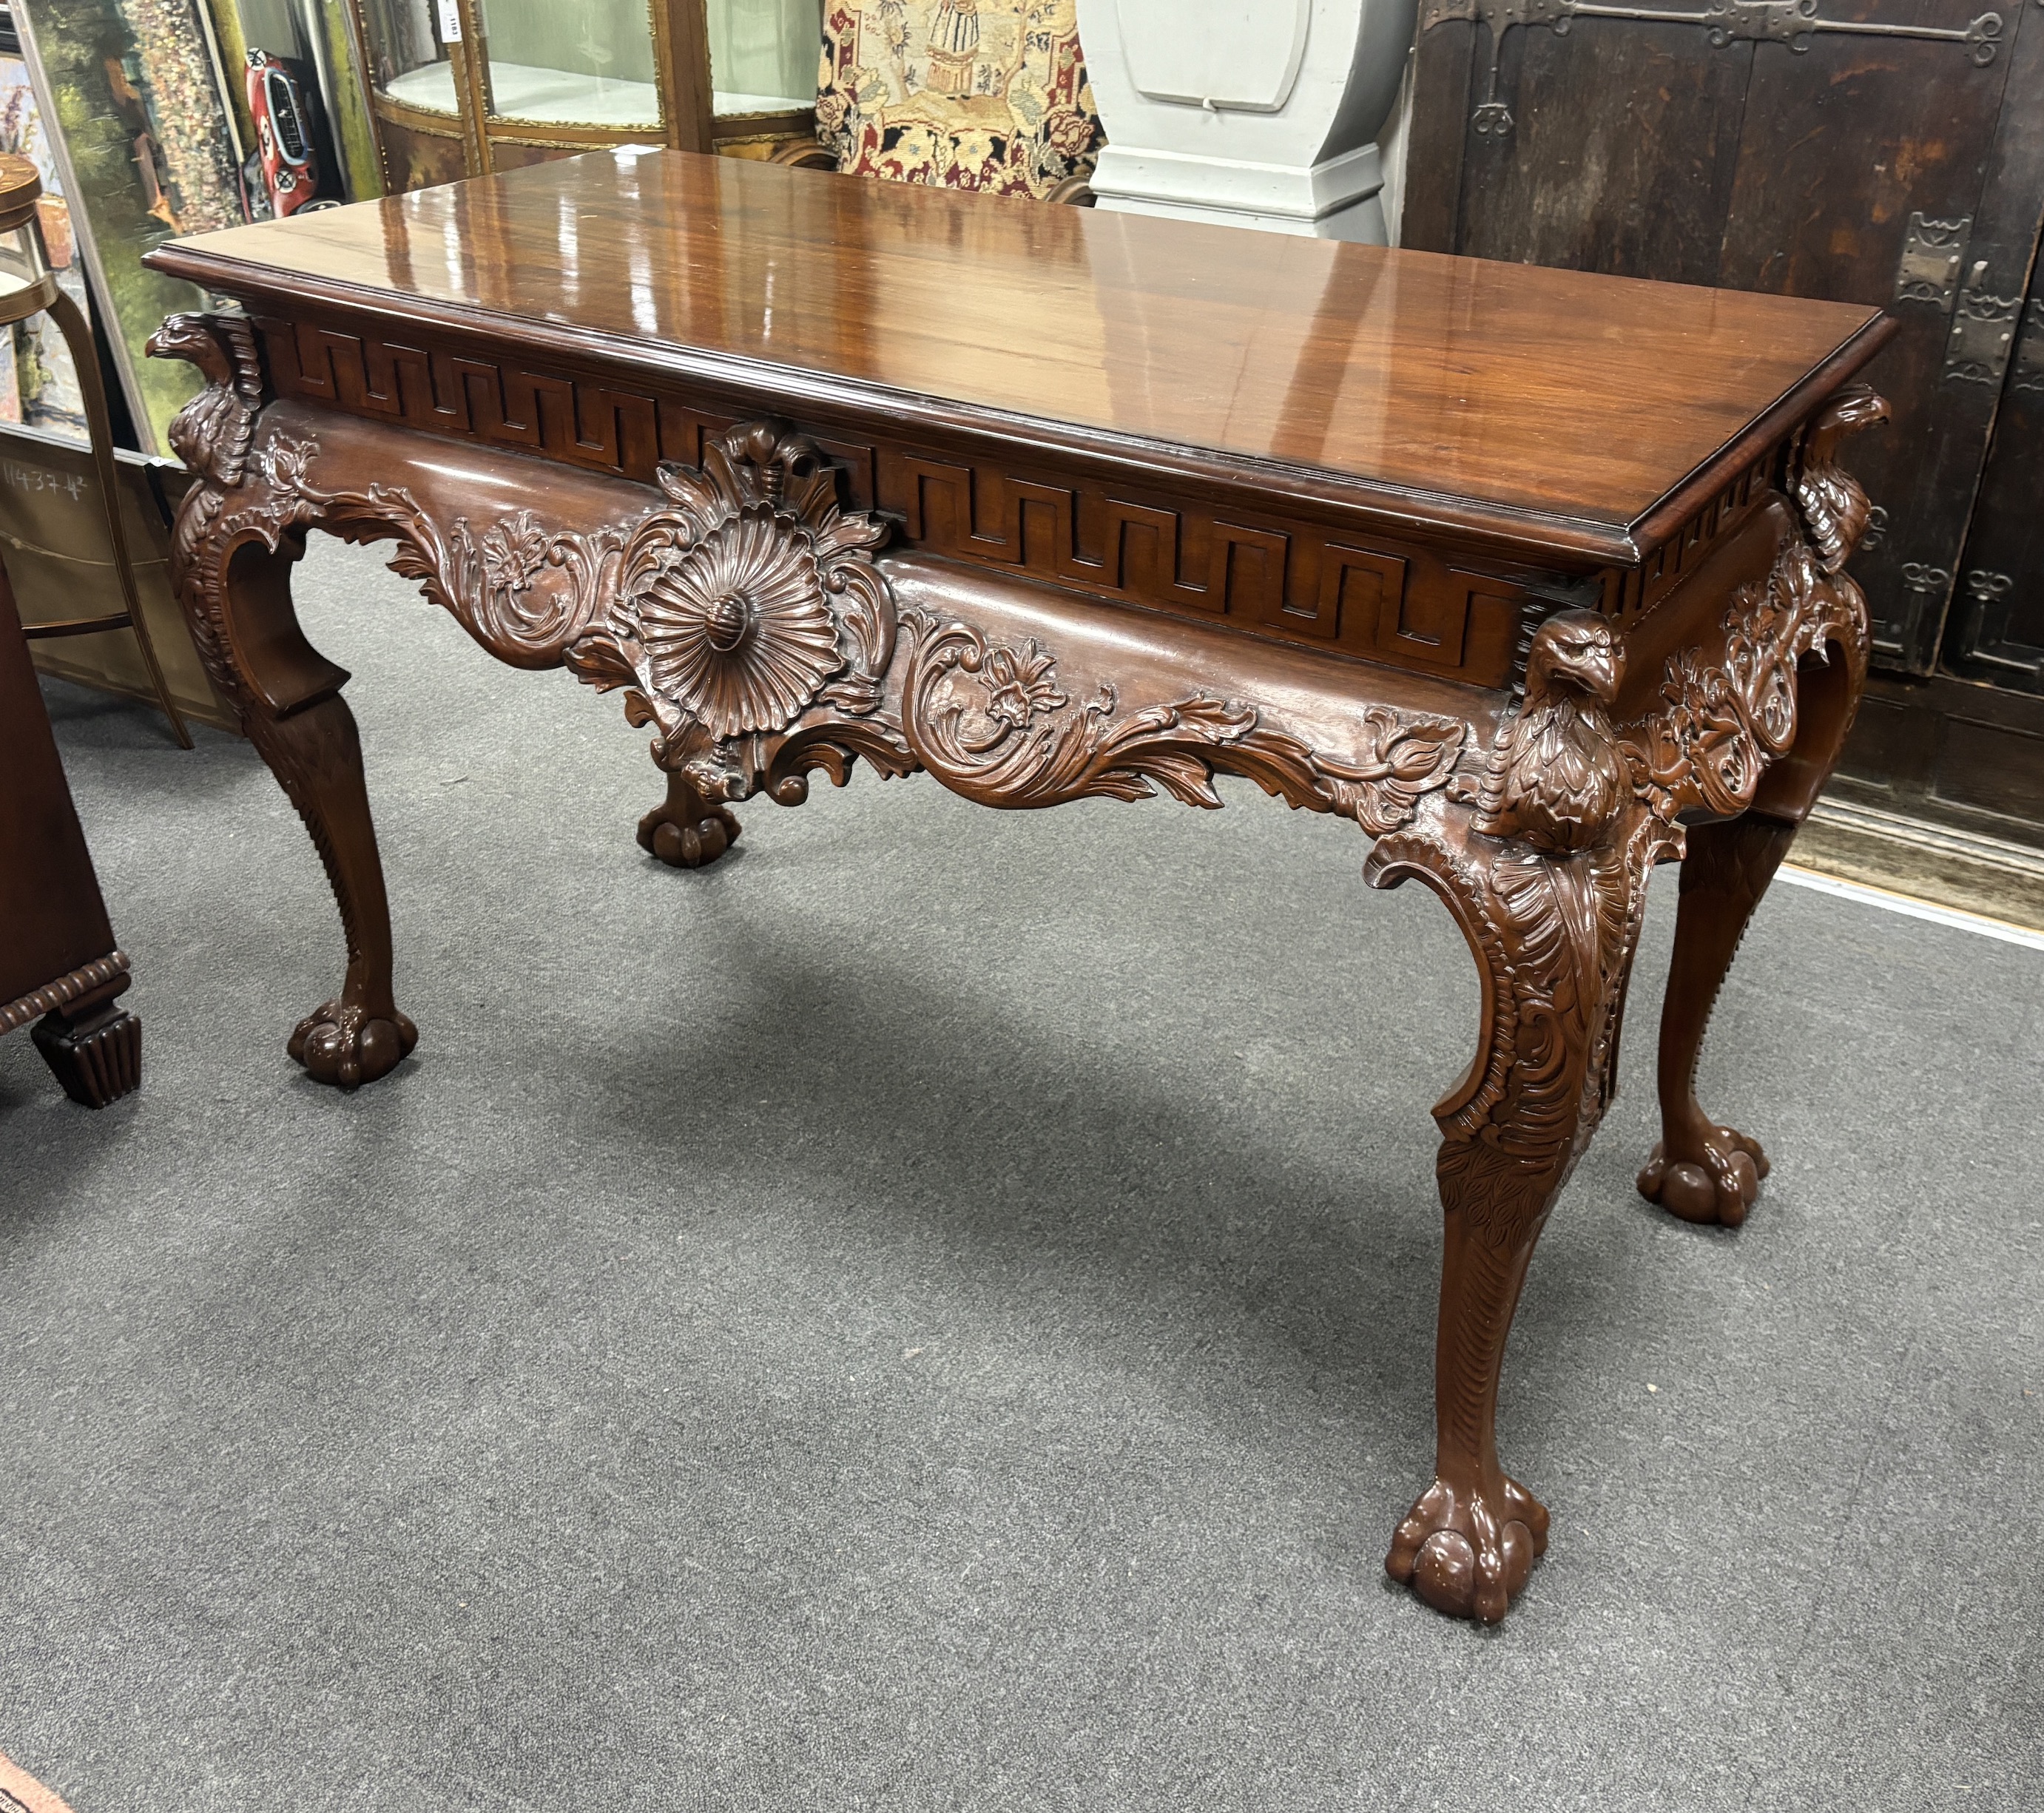 An 18th century style Irish style carved mahogany console table, width 136cm, depth 63cm, height 84cm